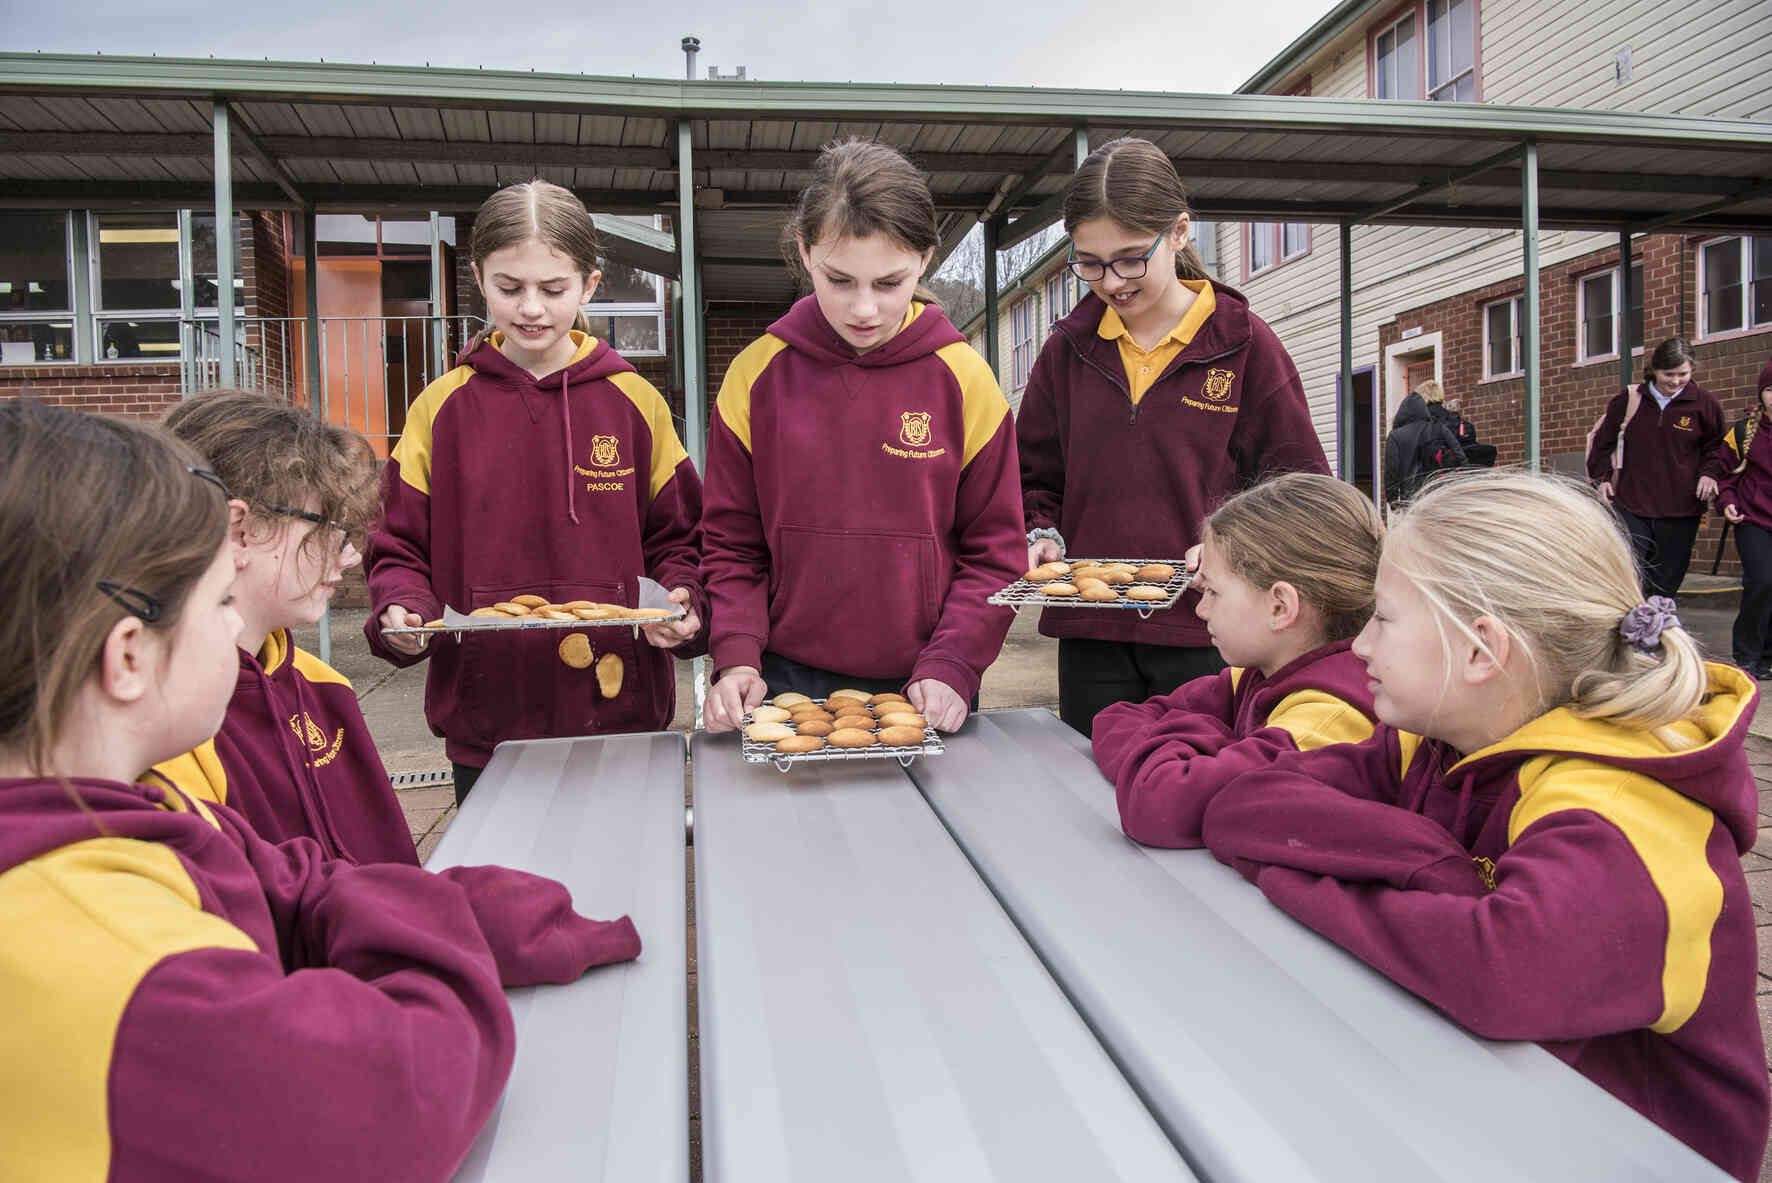 Children bringing trays of baked goods to a table of peers